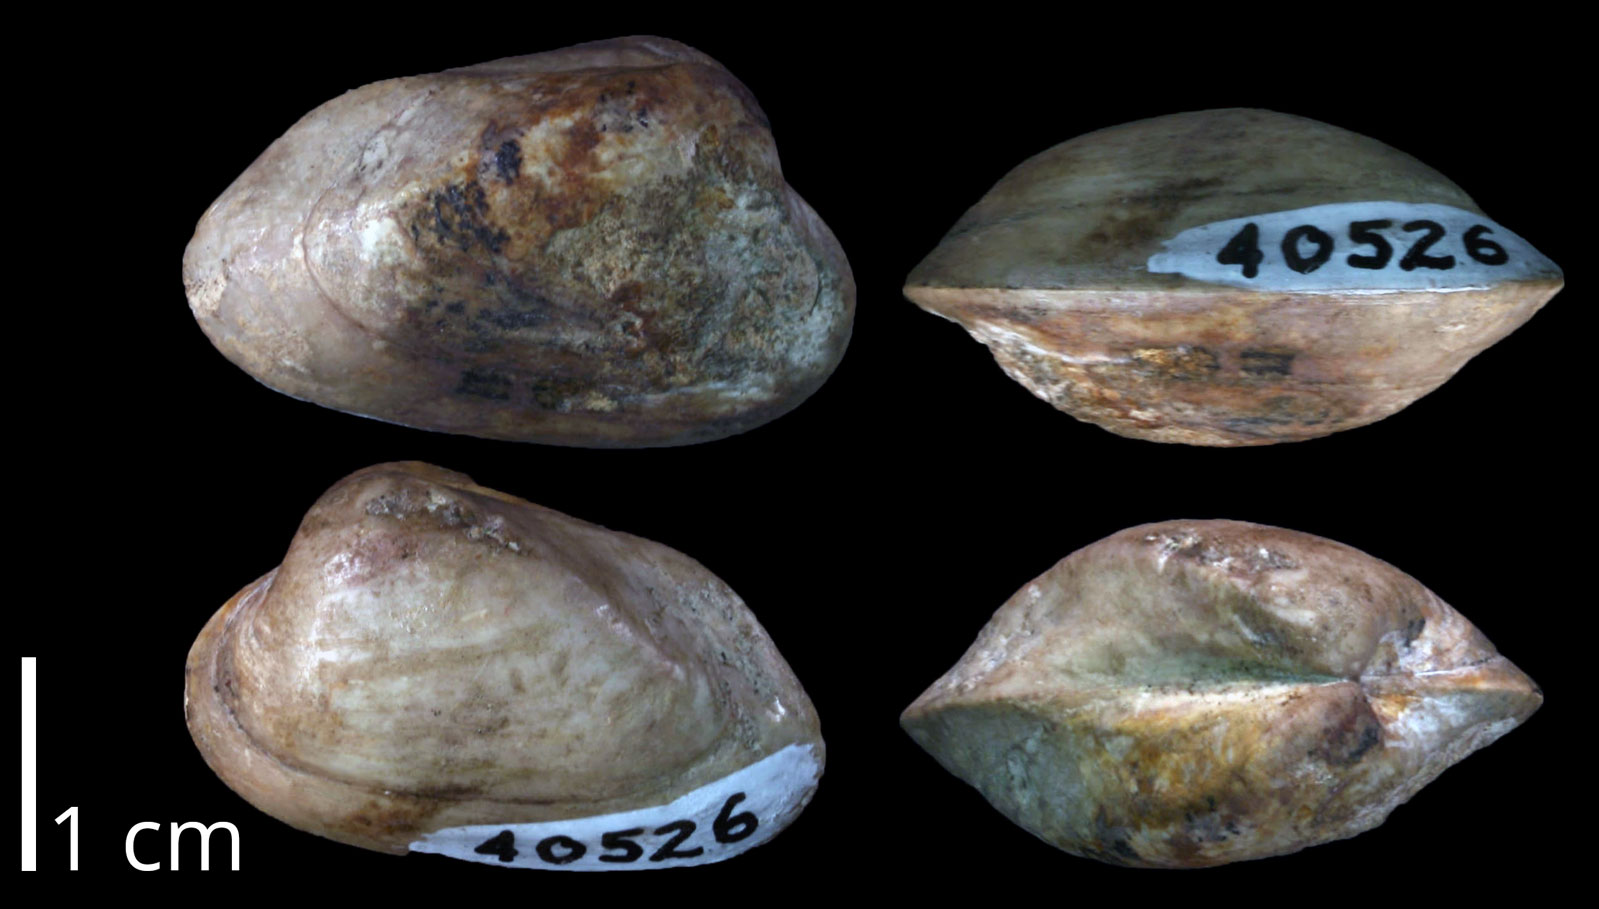 Photographs showing four views (top, bottom, front, and back or hinge) of a fossil bivalve from the Cretaceous of Texas. The shell is relatively smooth.